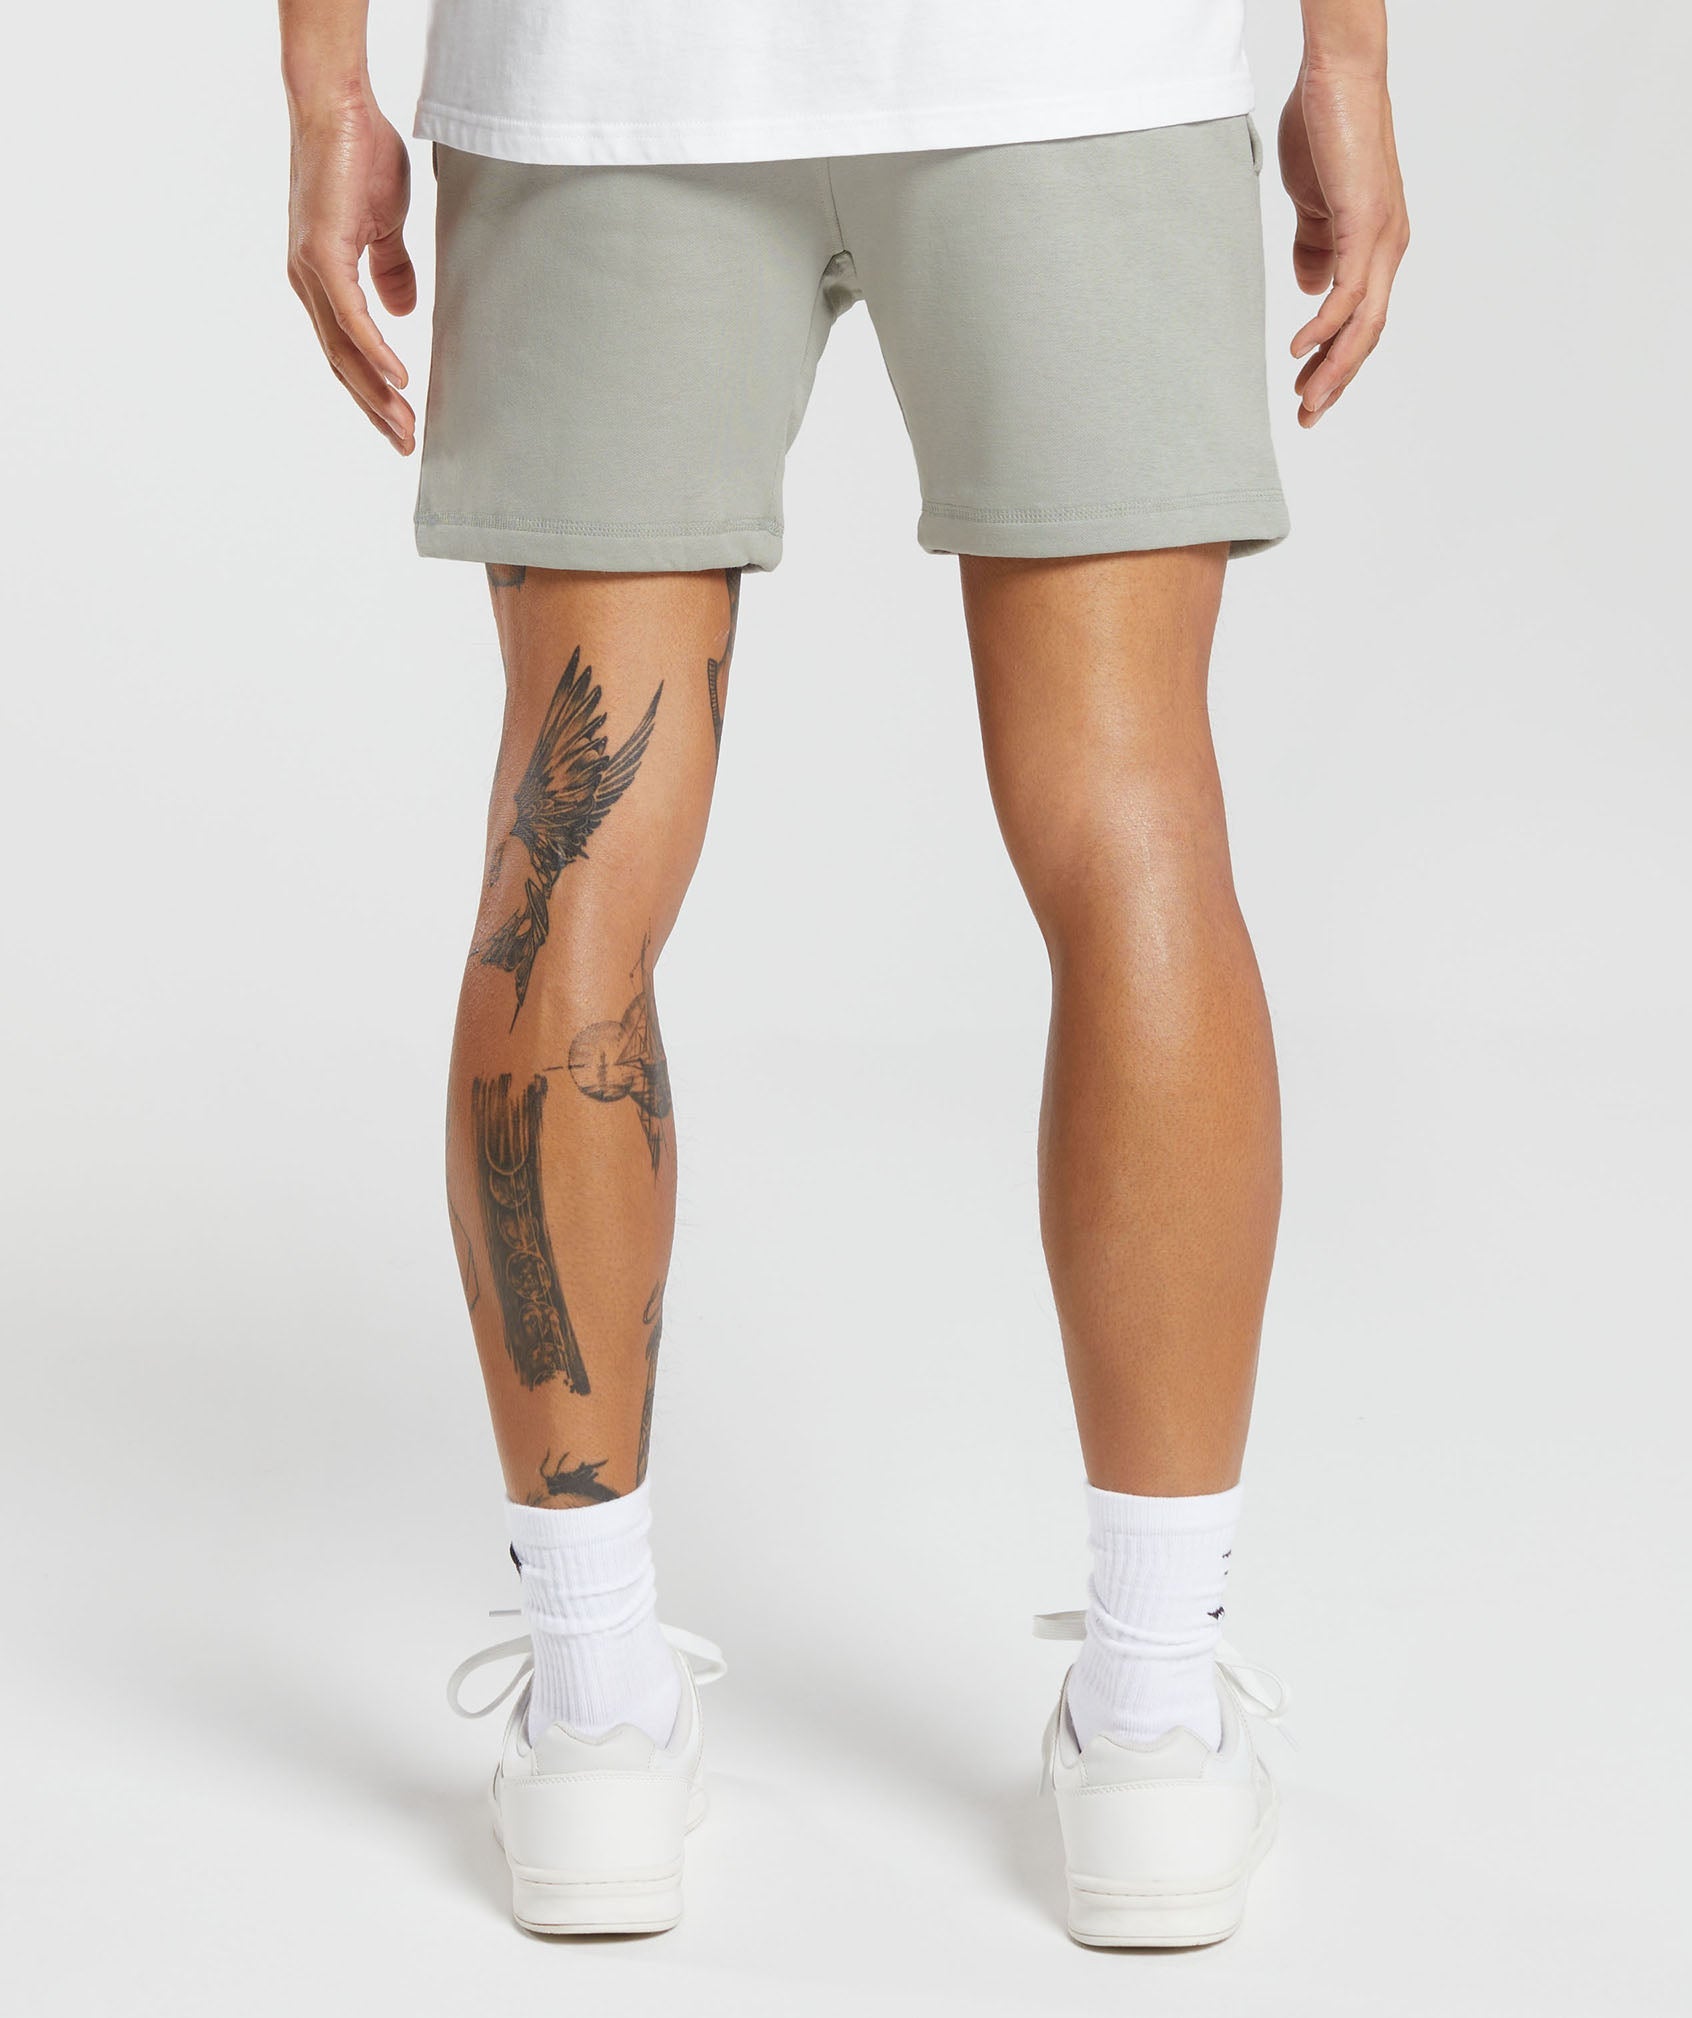 Crest 7" Shorts in Stone Grey - view 2